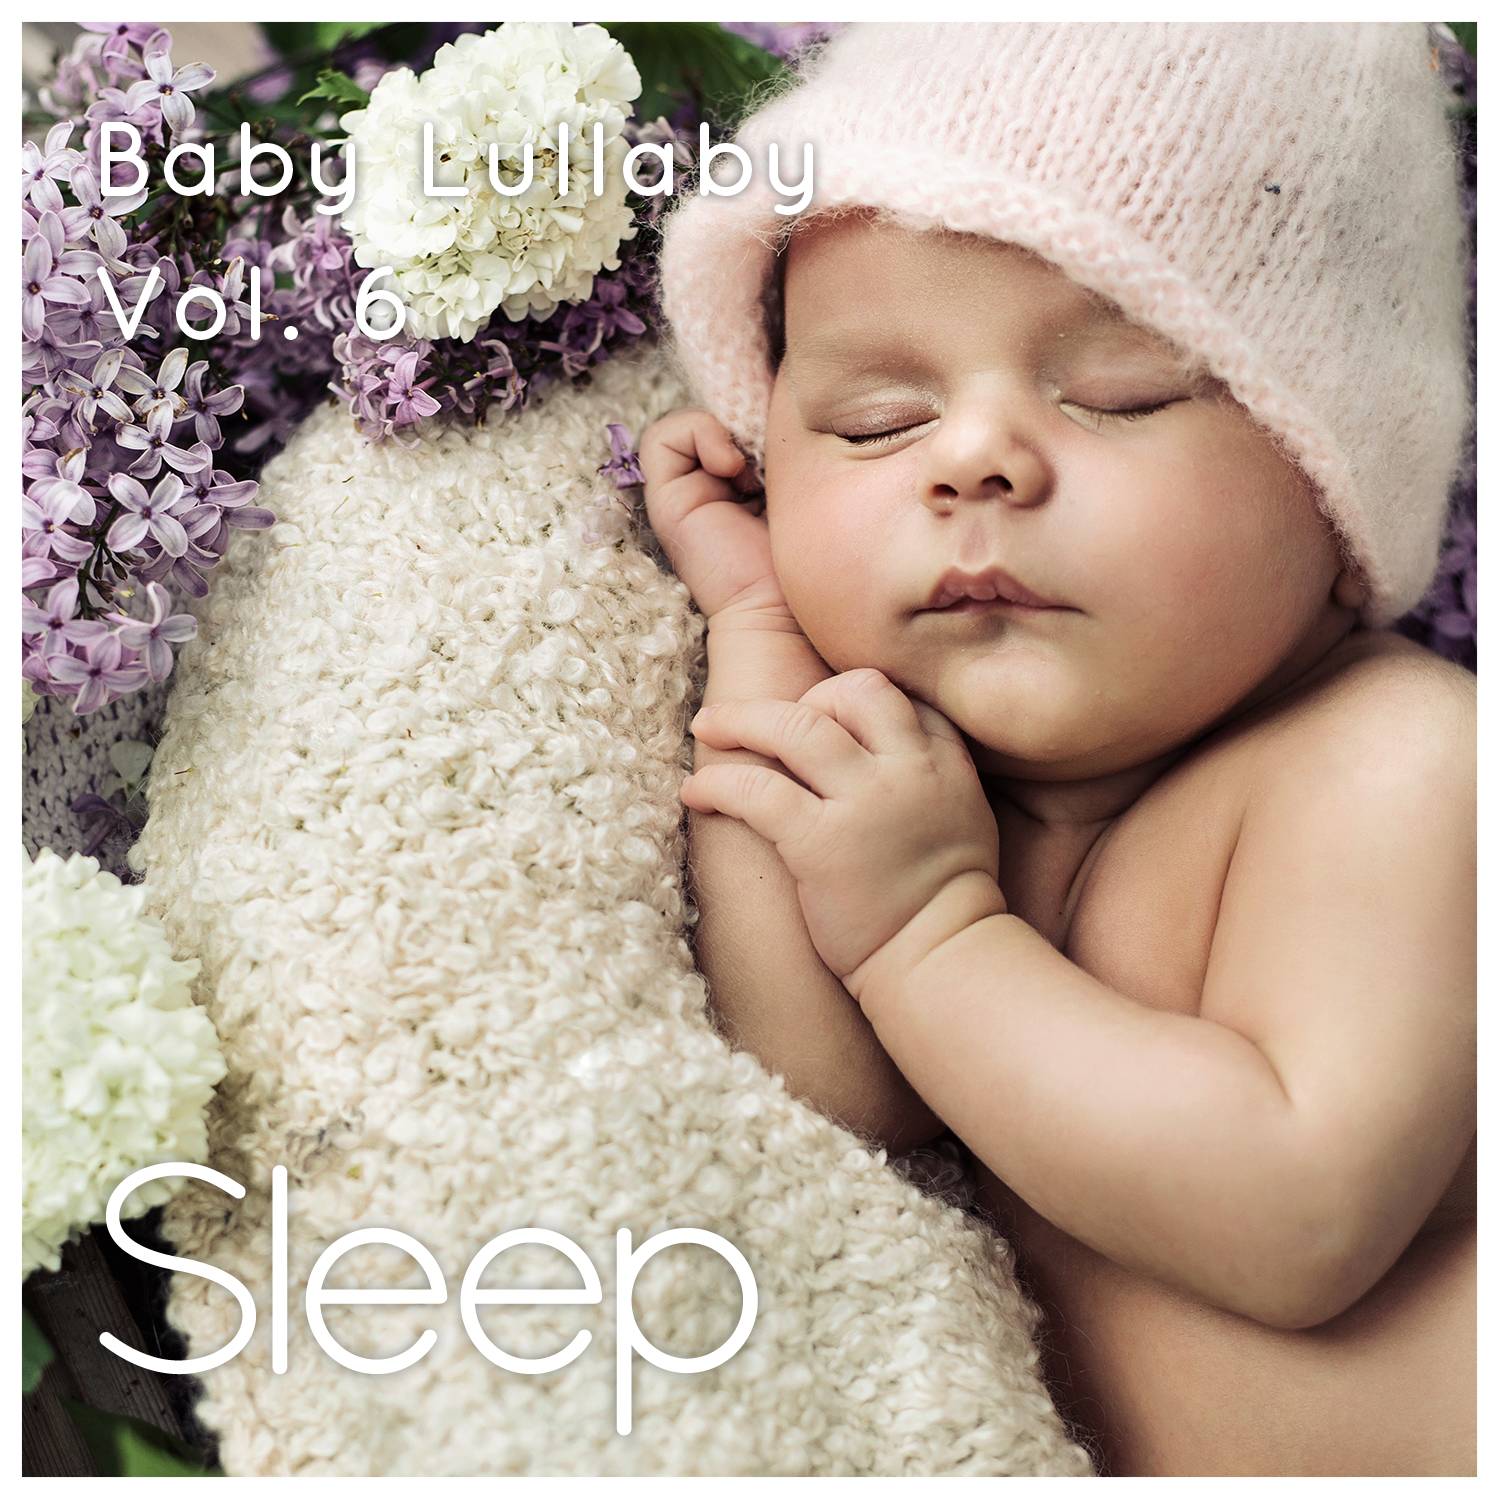 Baby Sleep Ambient Lullaby, Pt. 26